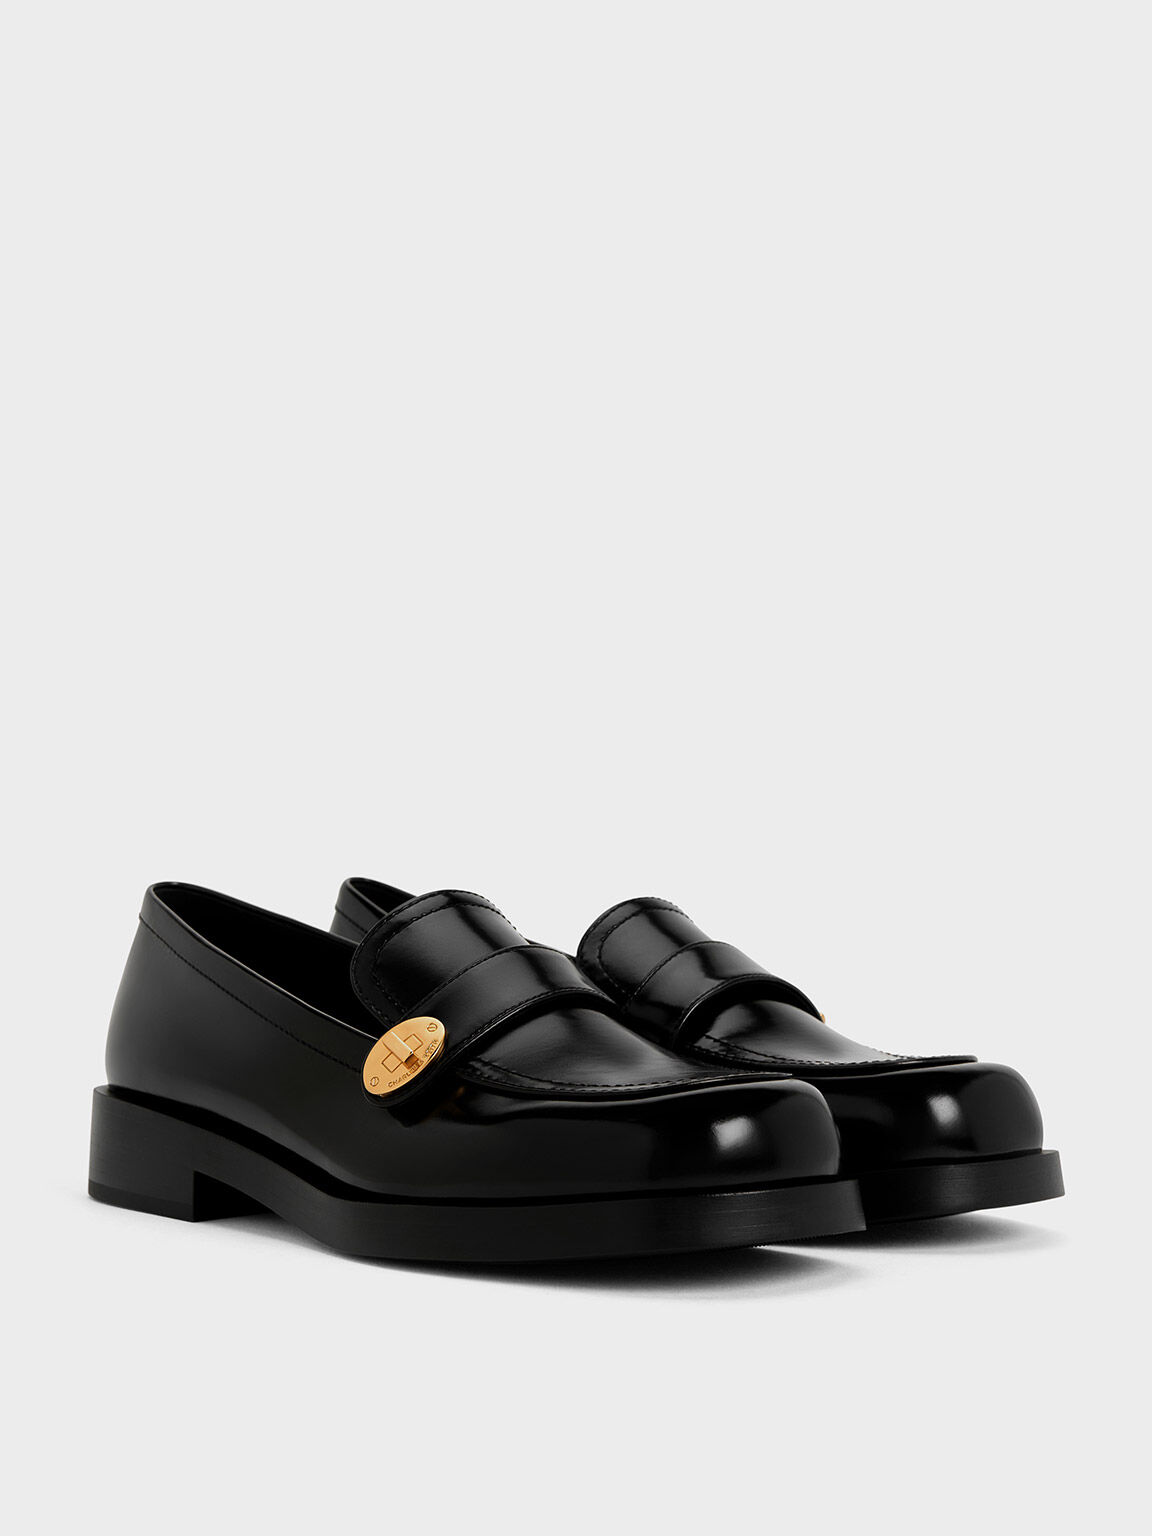 Women's Loafers | Shop Exclusive Styles | CHARLES & KEITH US